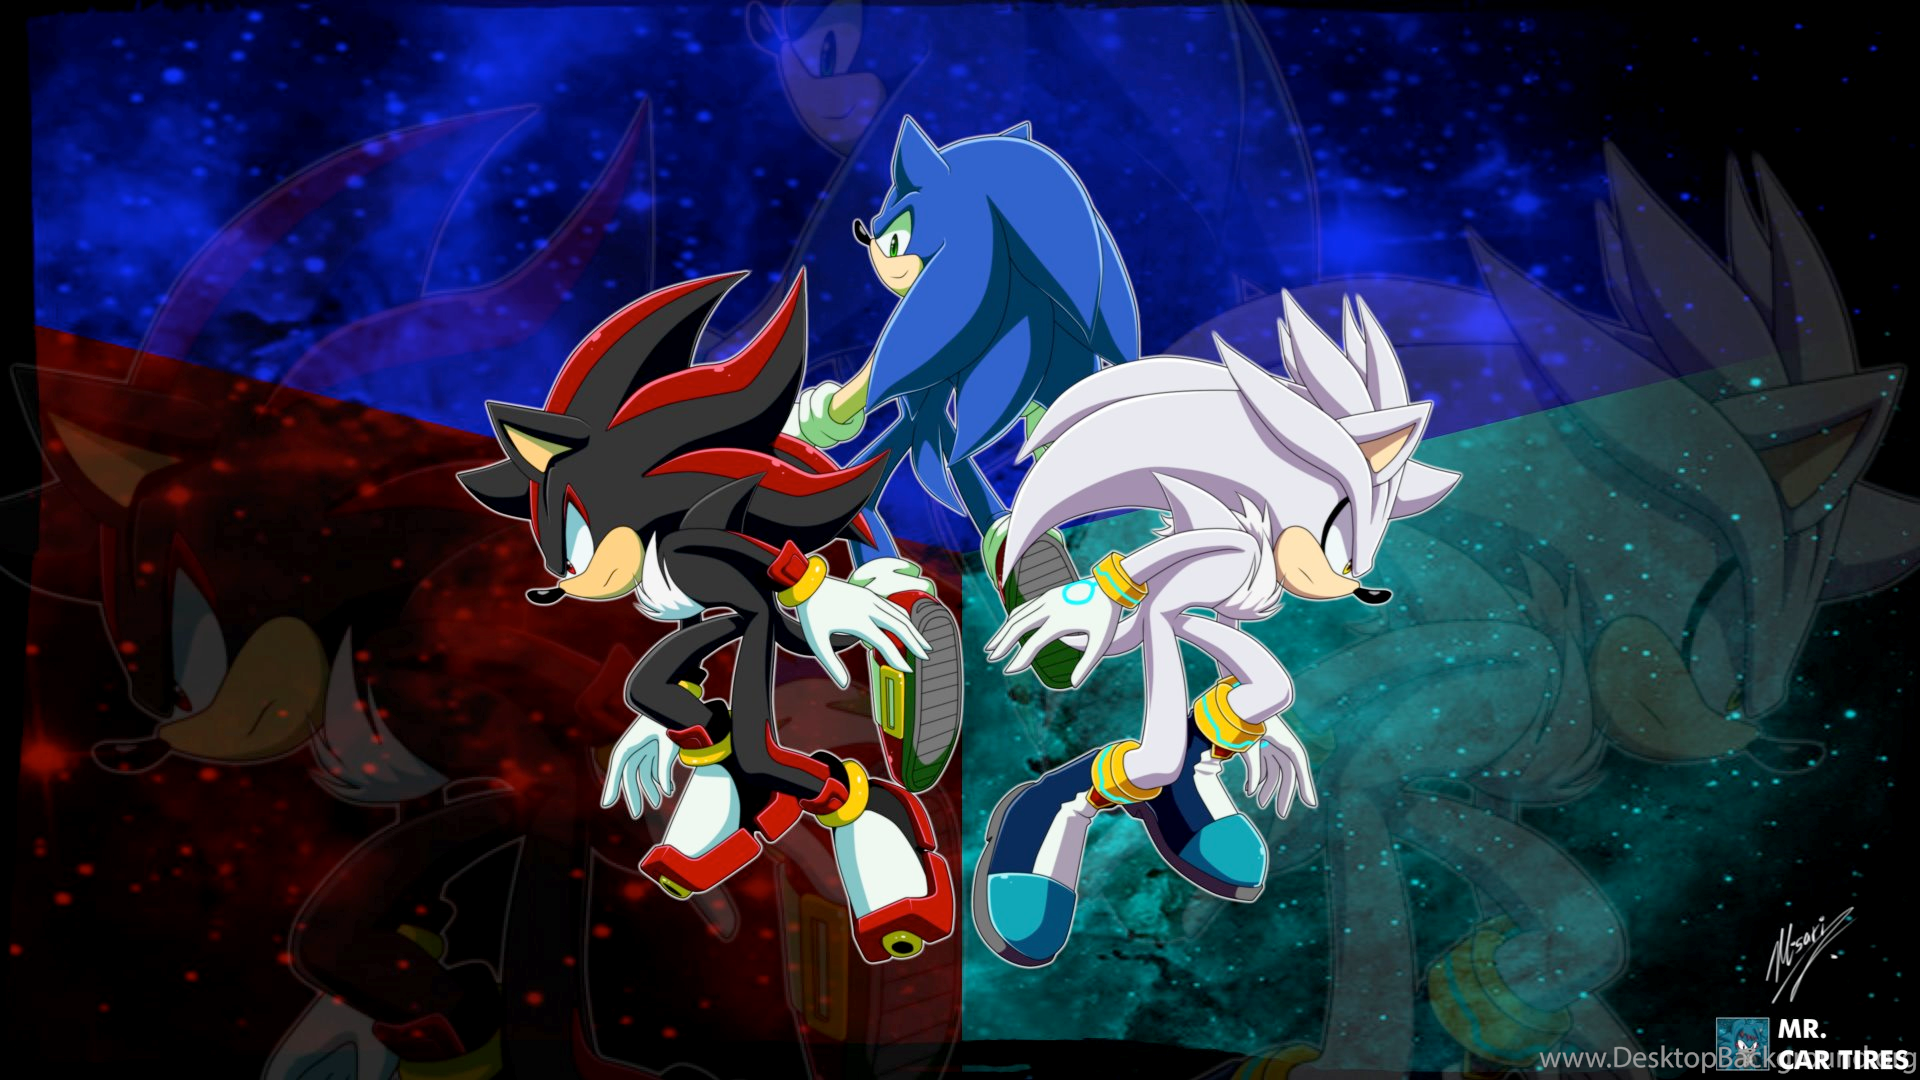 Sonic Shadow Silver wallpaper by dimondqueen - Download on ZEDGE™